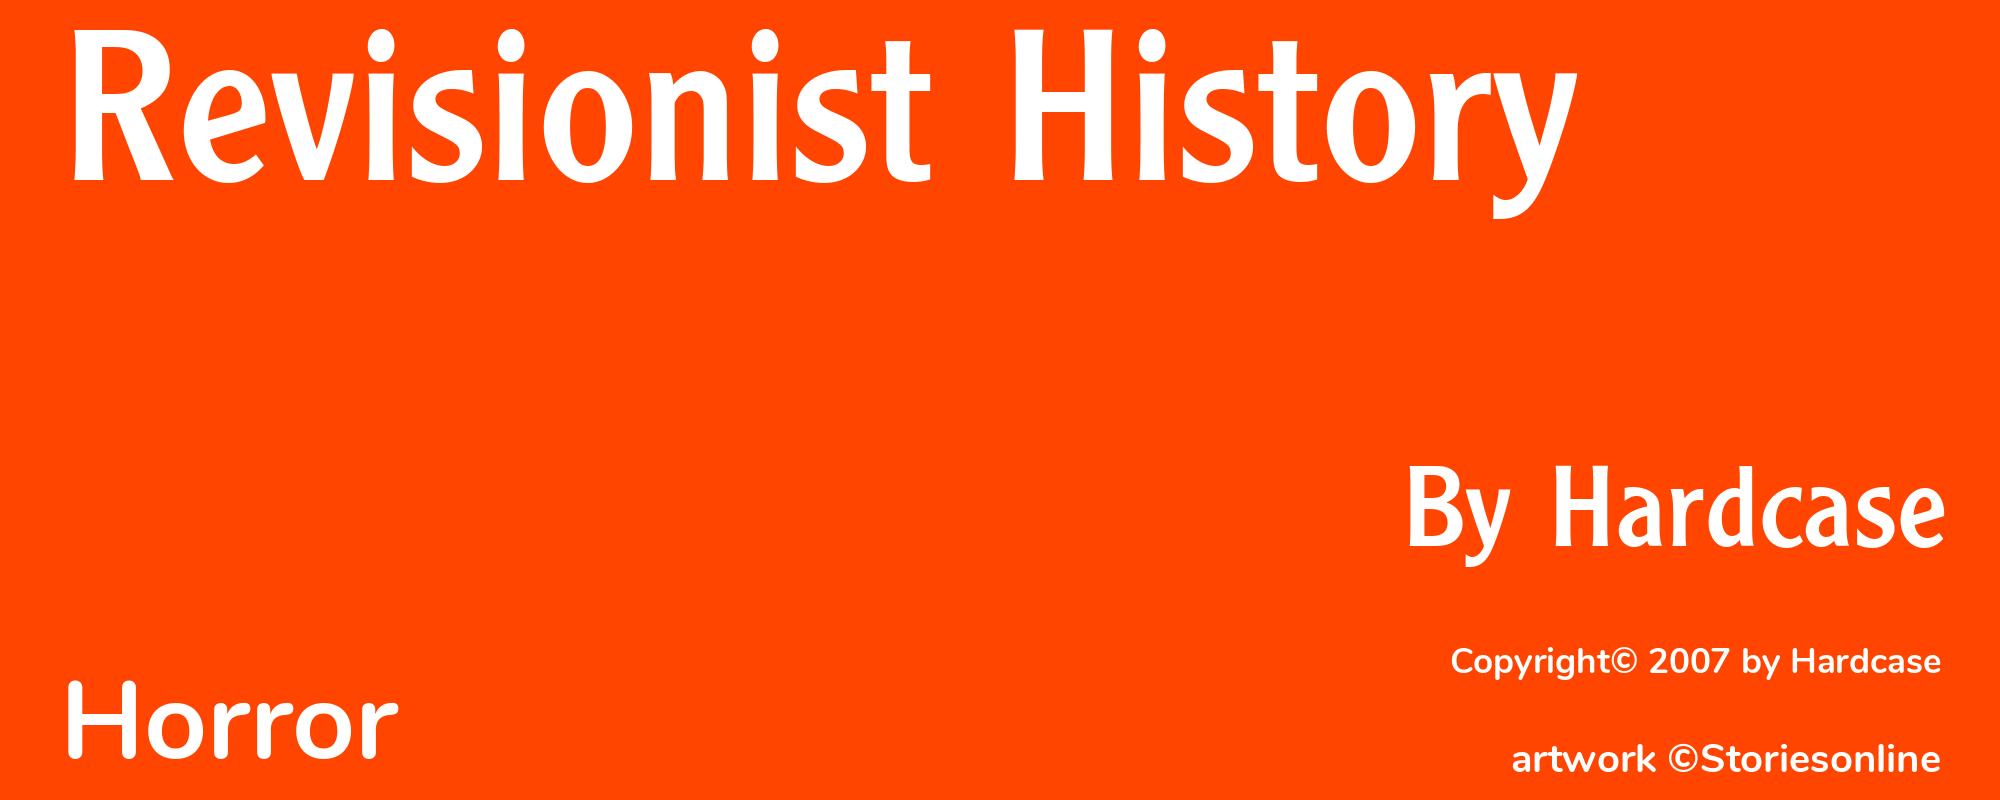 Revisionist History - Cover